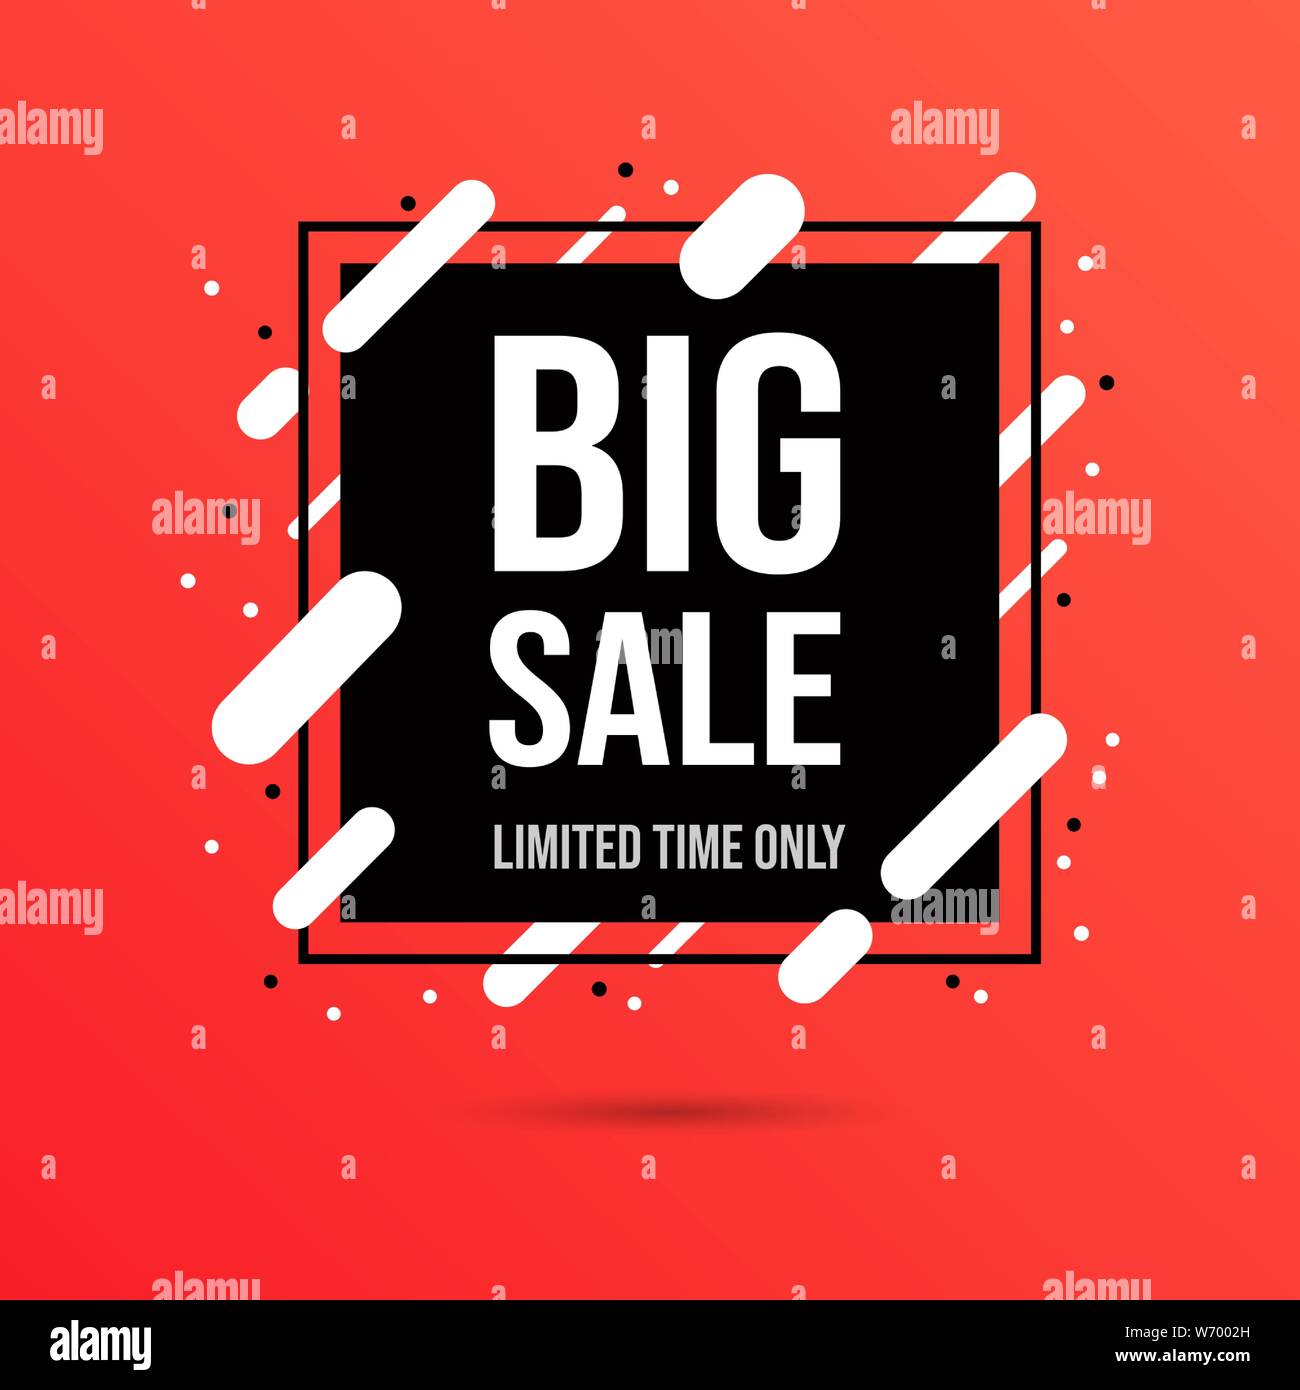 Great Deal Banner or Label for Digital Media Marketing Sale Advertising  Promotion. Discount Hot Offer, Weekend Shopping Stock Vector - Illustration  of banner, poster: 204771281